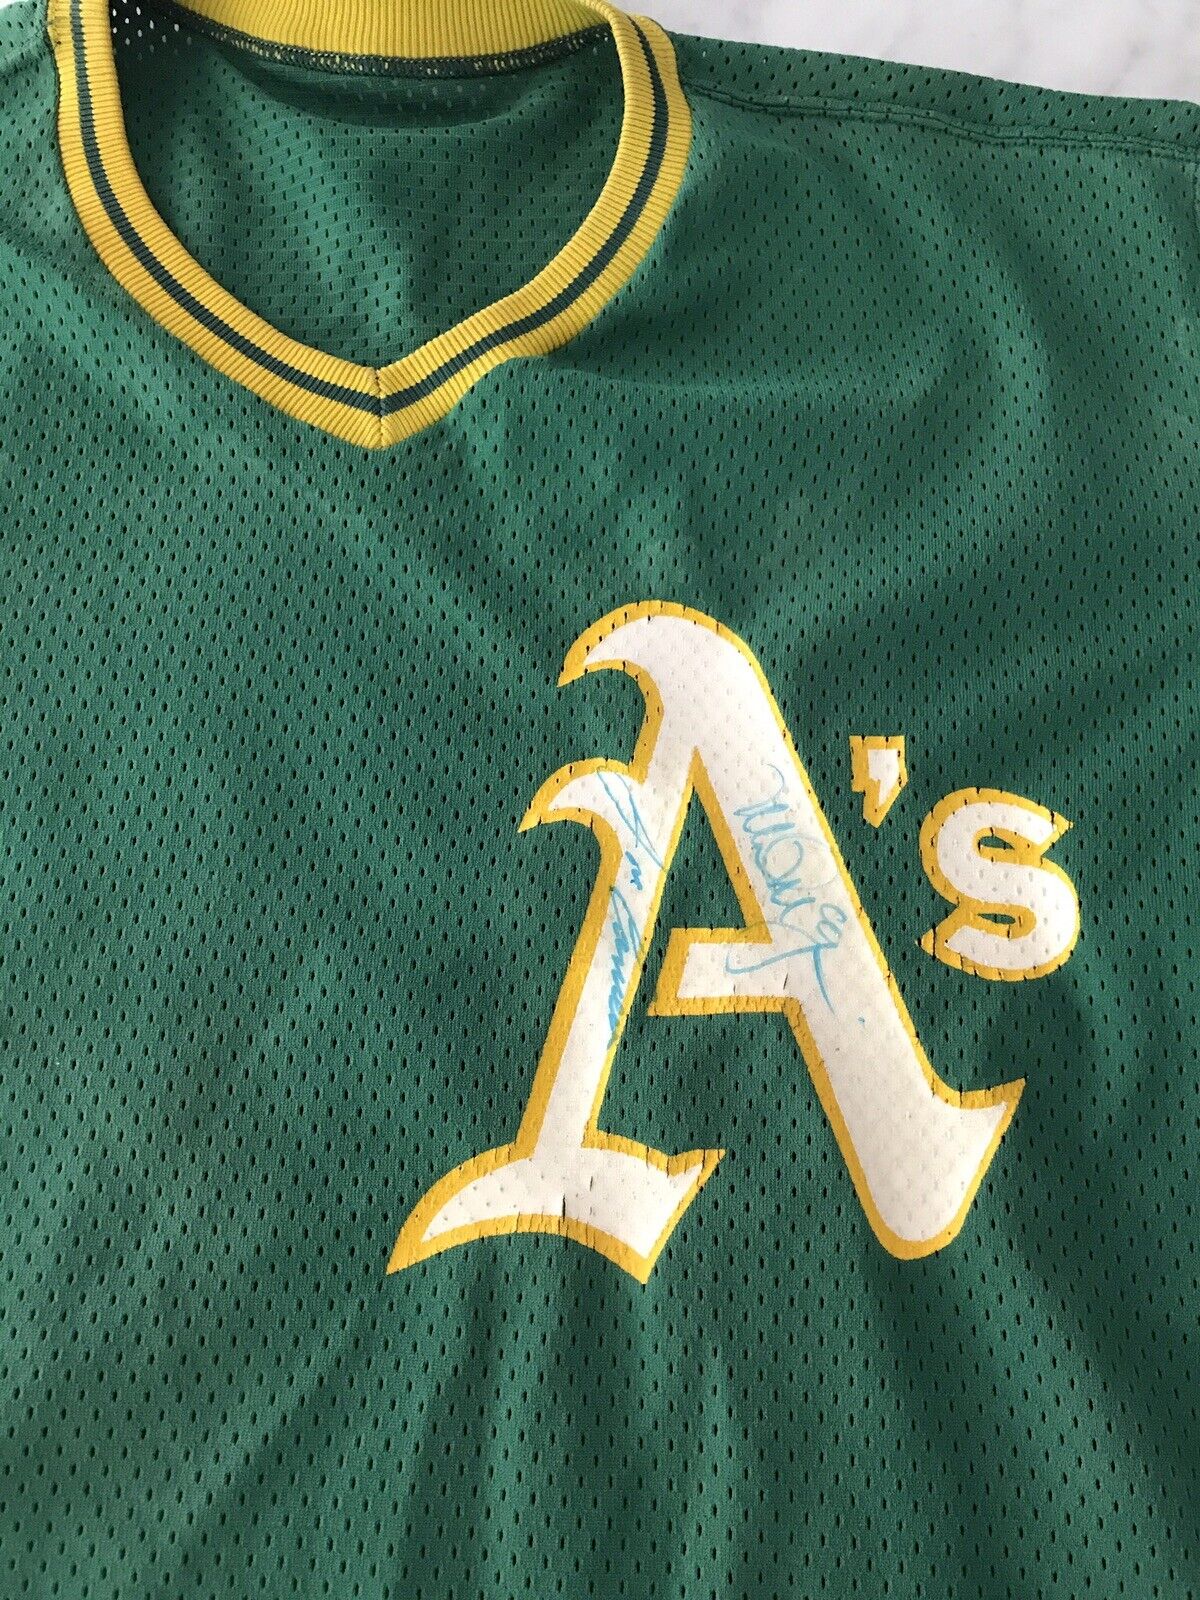 MARK MCGWIRE JOSE CANSECO ROLLIE FINGERS AUTOGRAPH SIGNED ATHLETICS JERSEY JSA